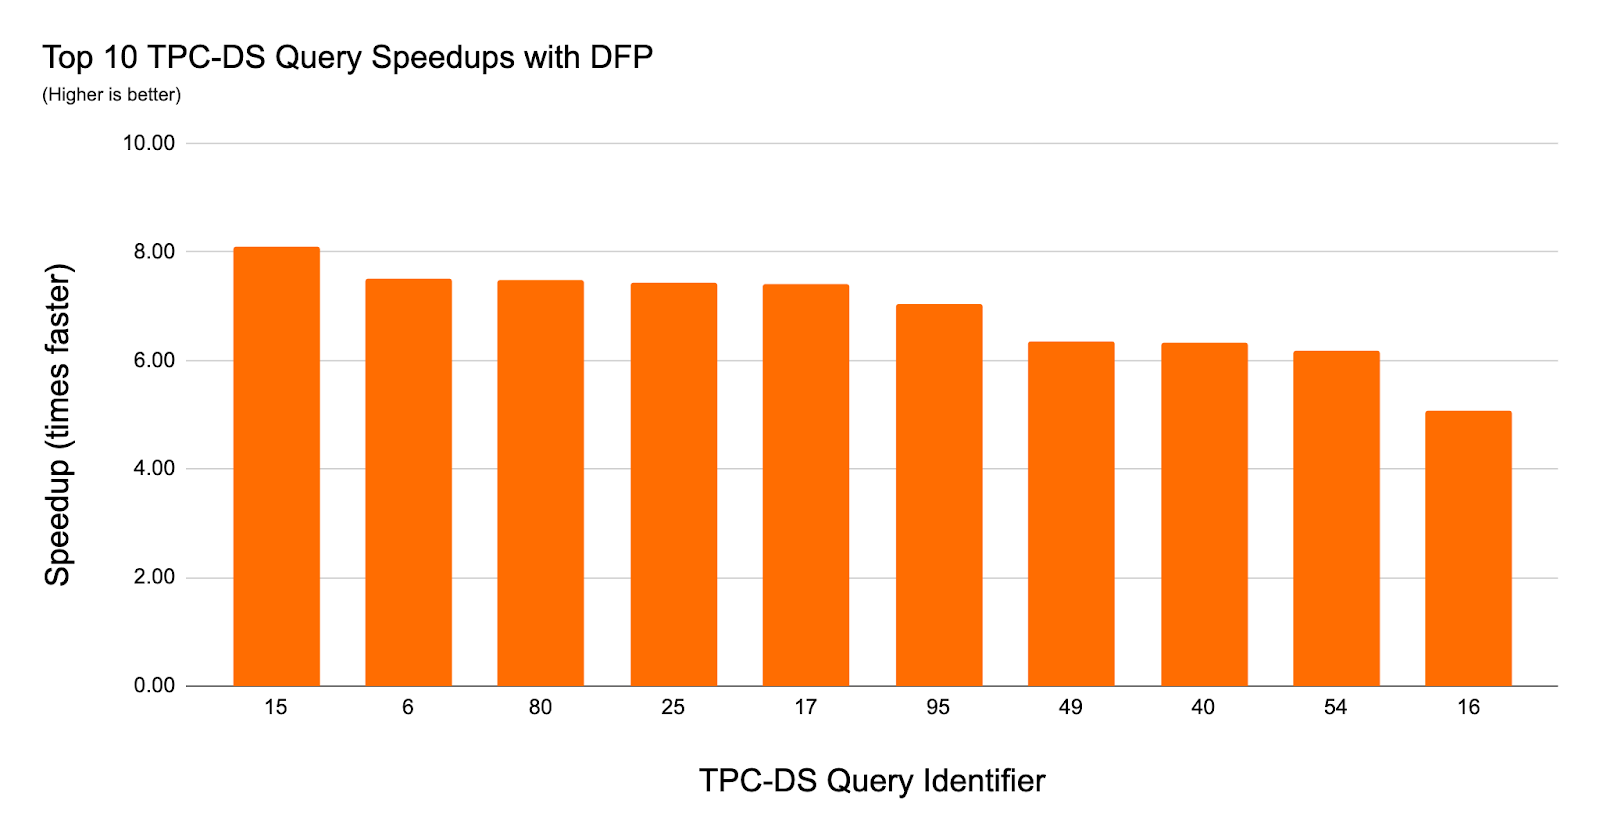 In experiments using TPC-DS data and queries with Dynamic File Pruning, Databricks observed up to an 8x speedup in query performance and 36 queries had a 2x or larger speedup.